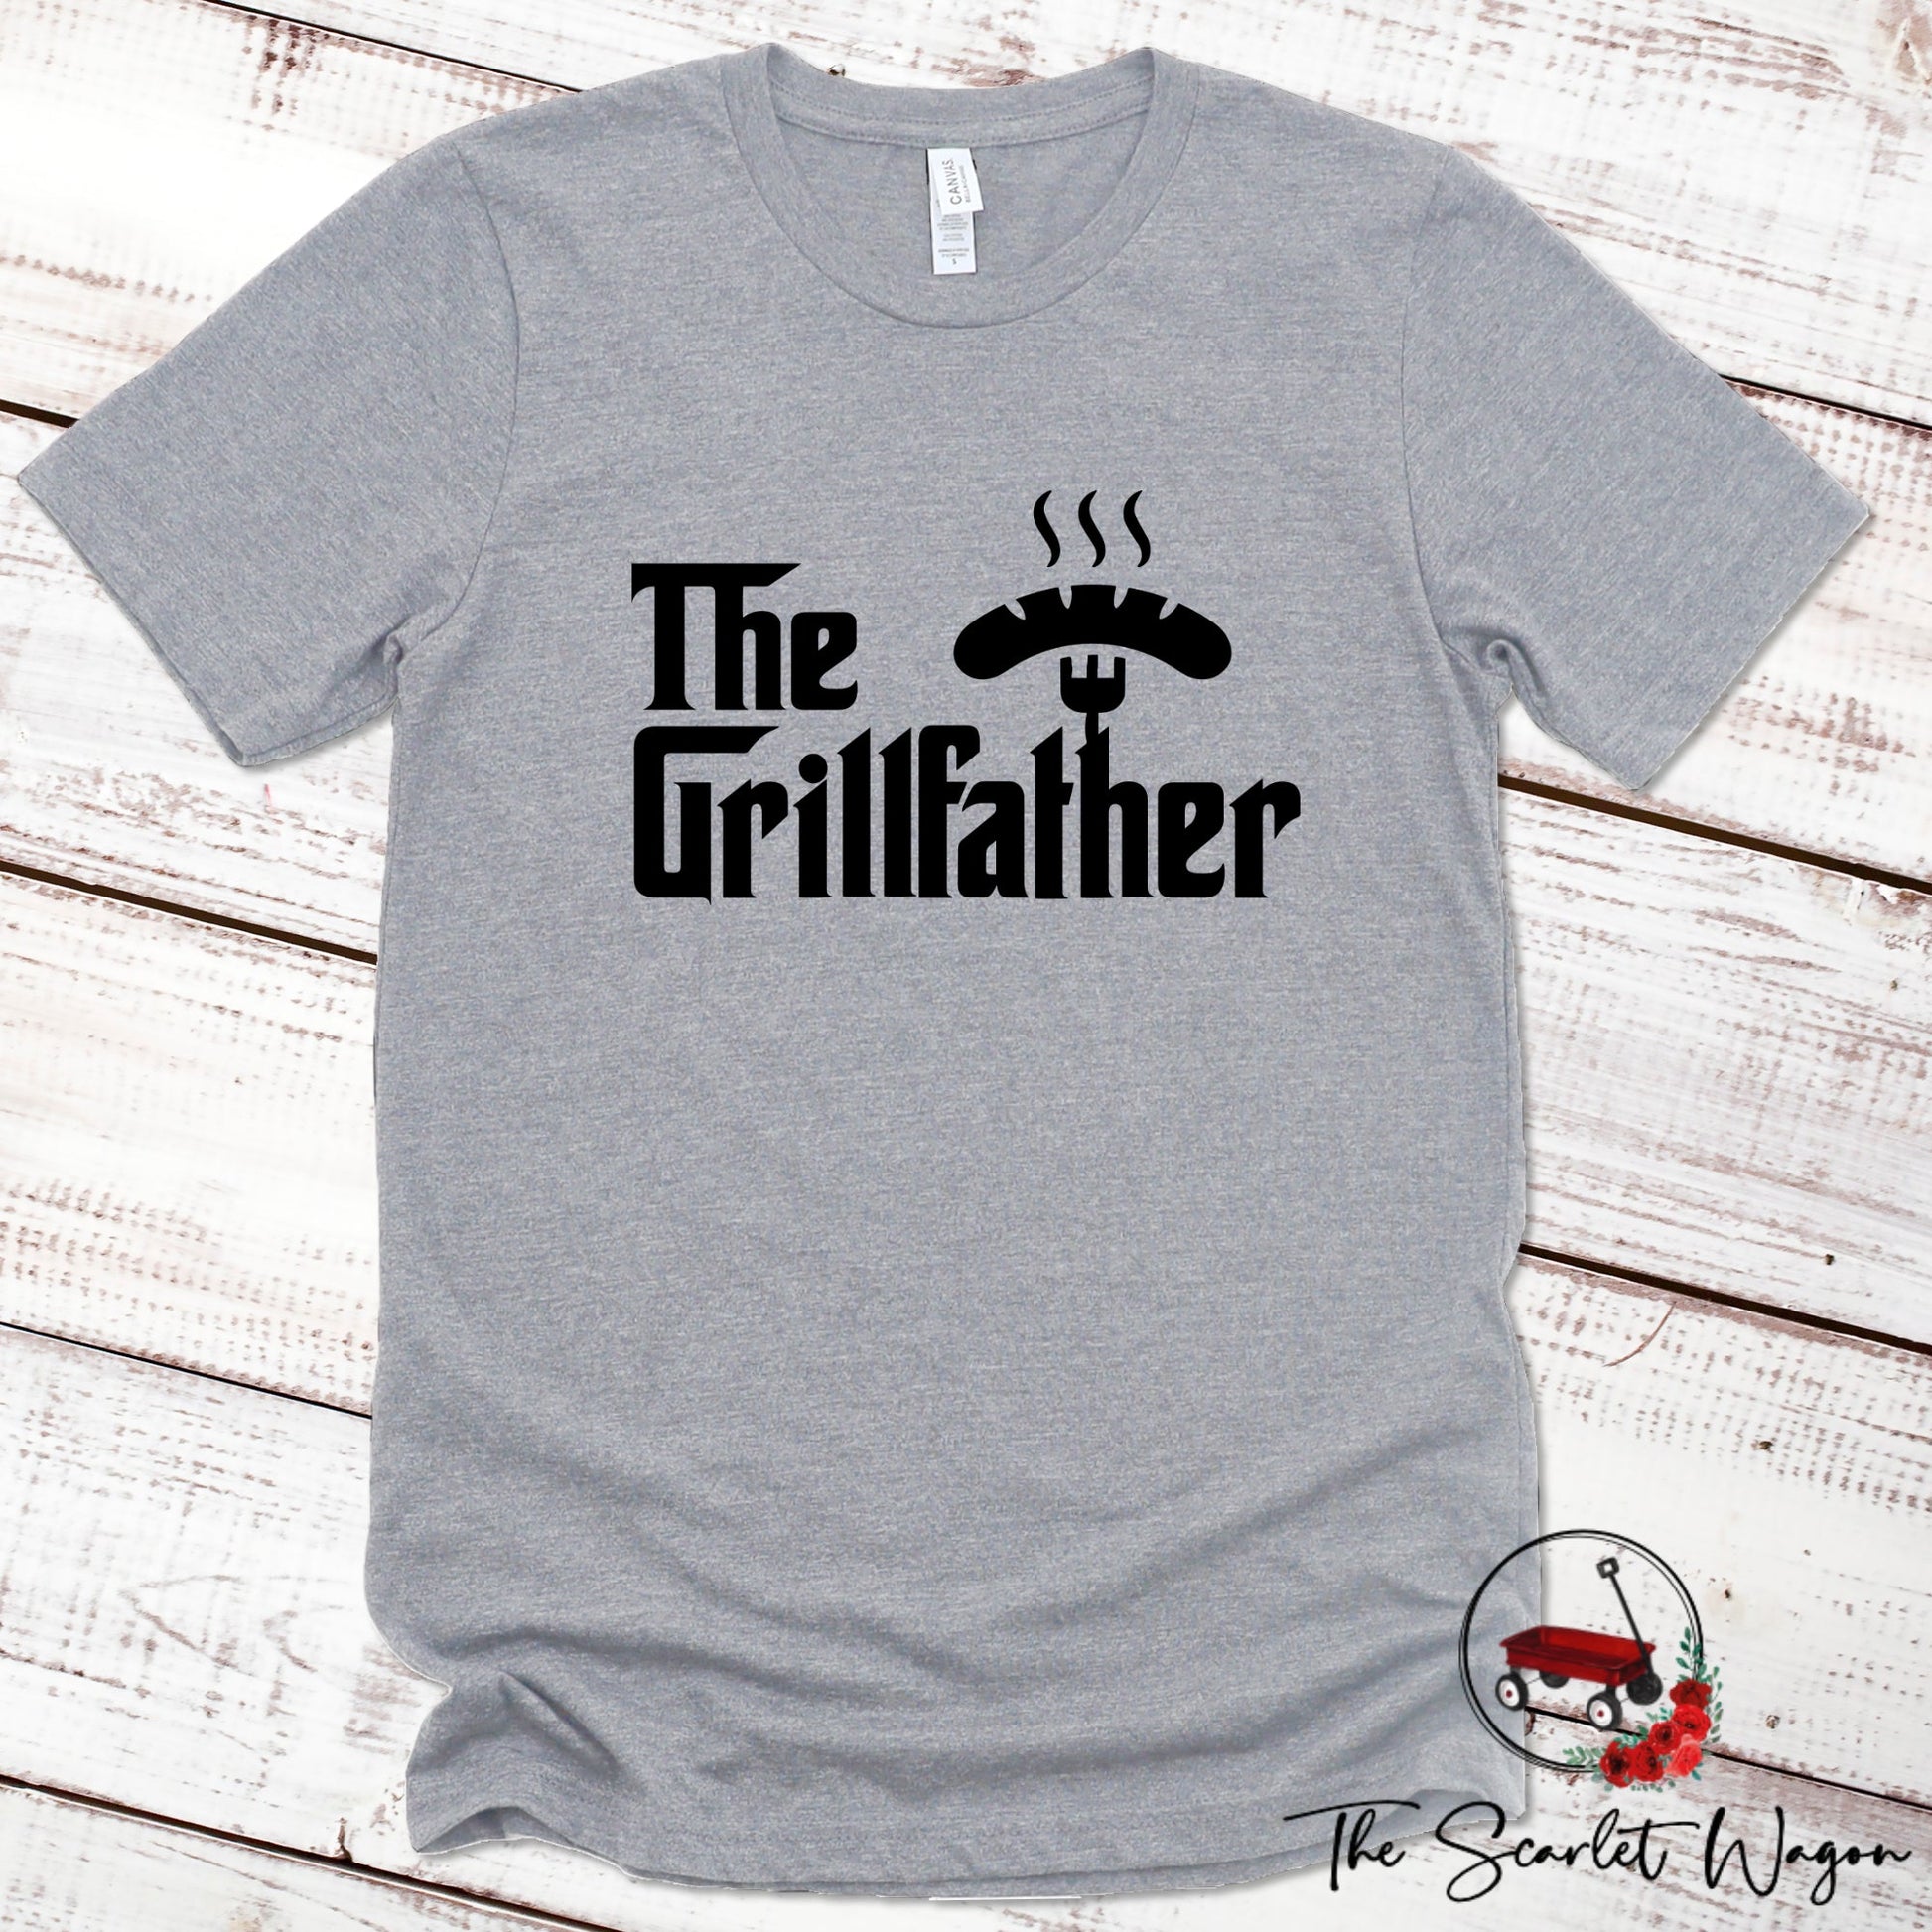 The Grillfather Premium Tee Scarlet Wagon Athletic Heather XS 